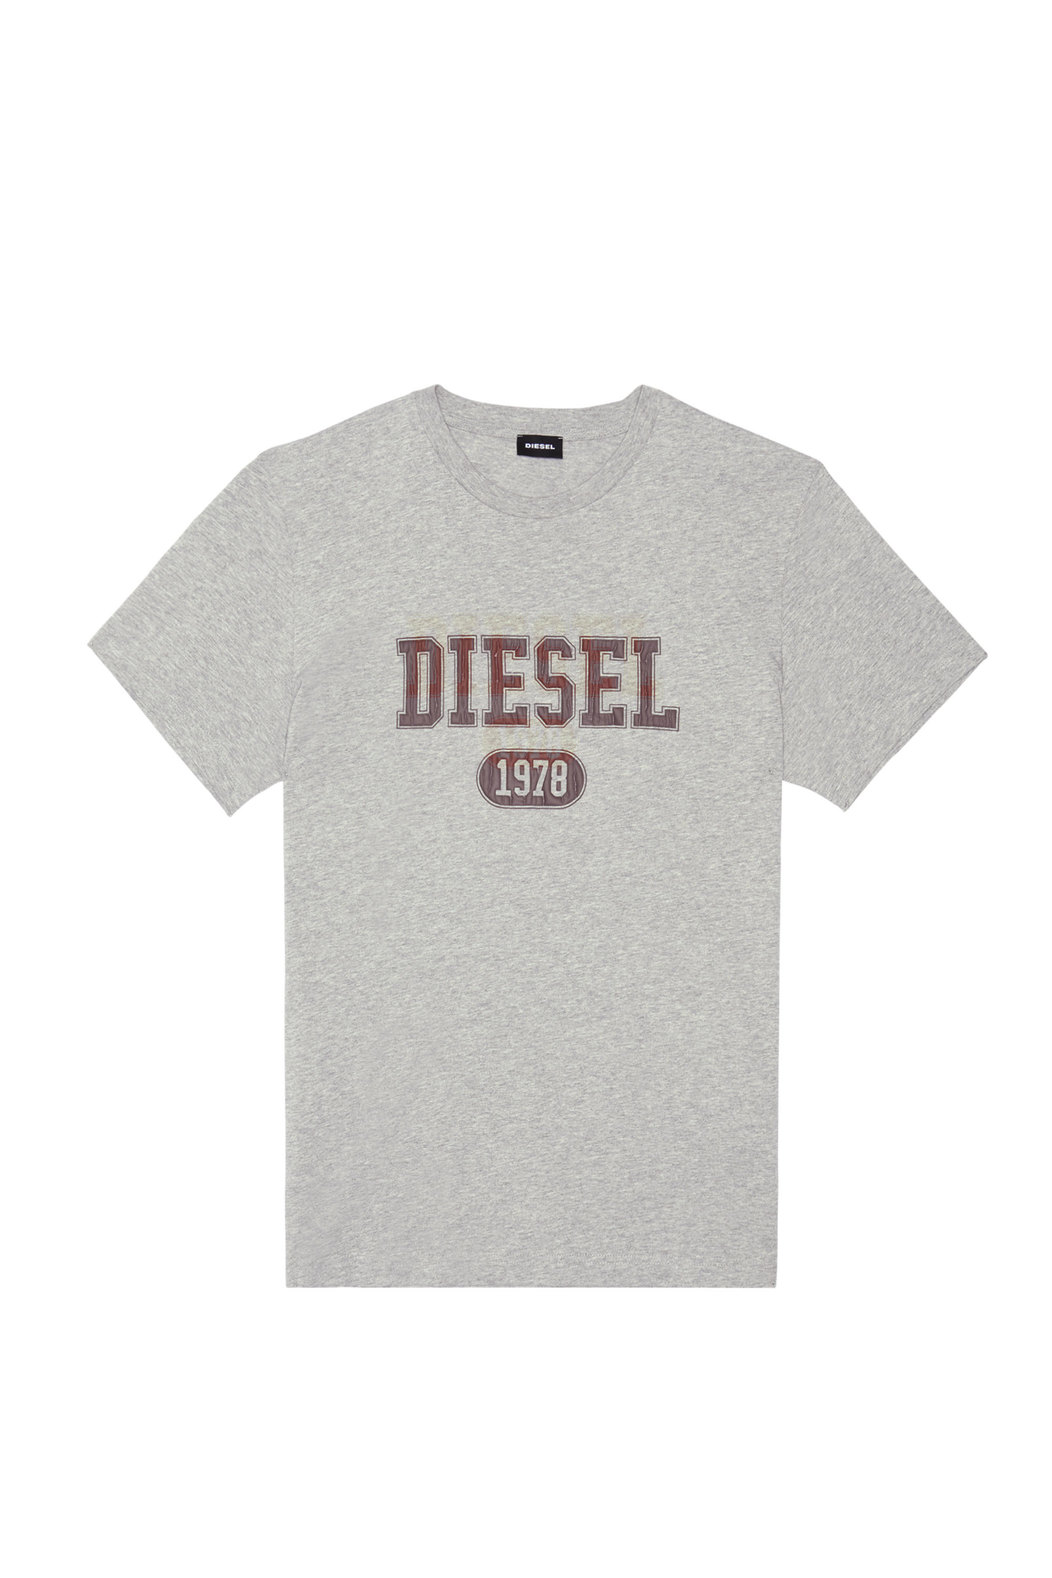 T-shirt with 1978 logo